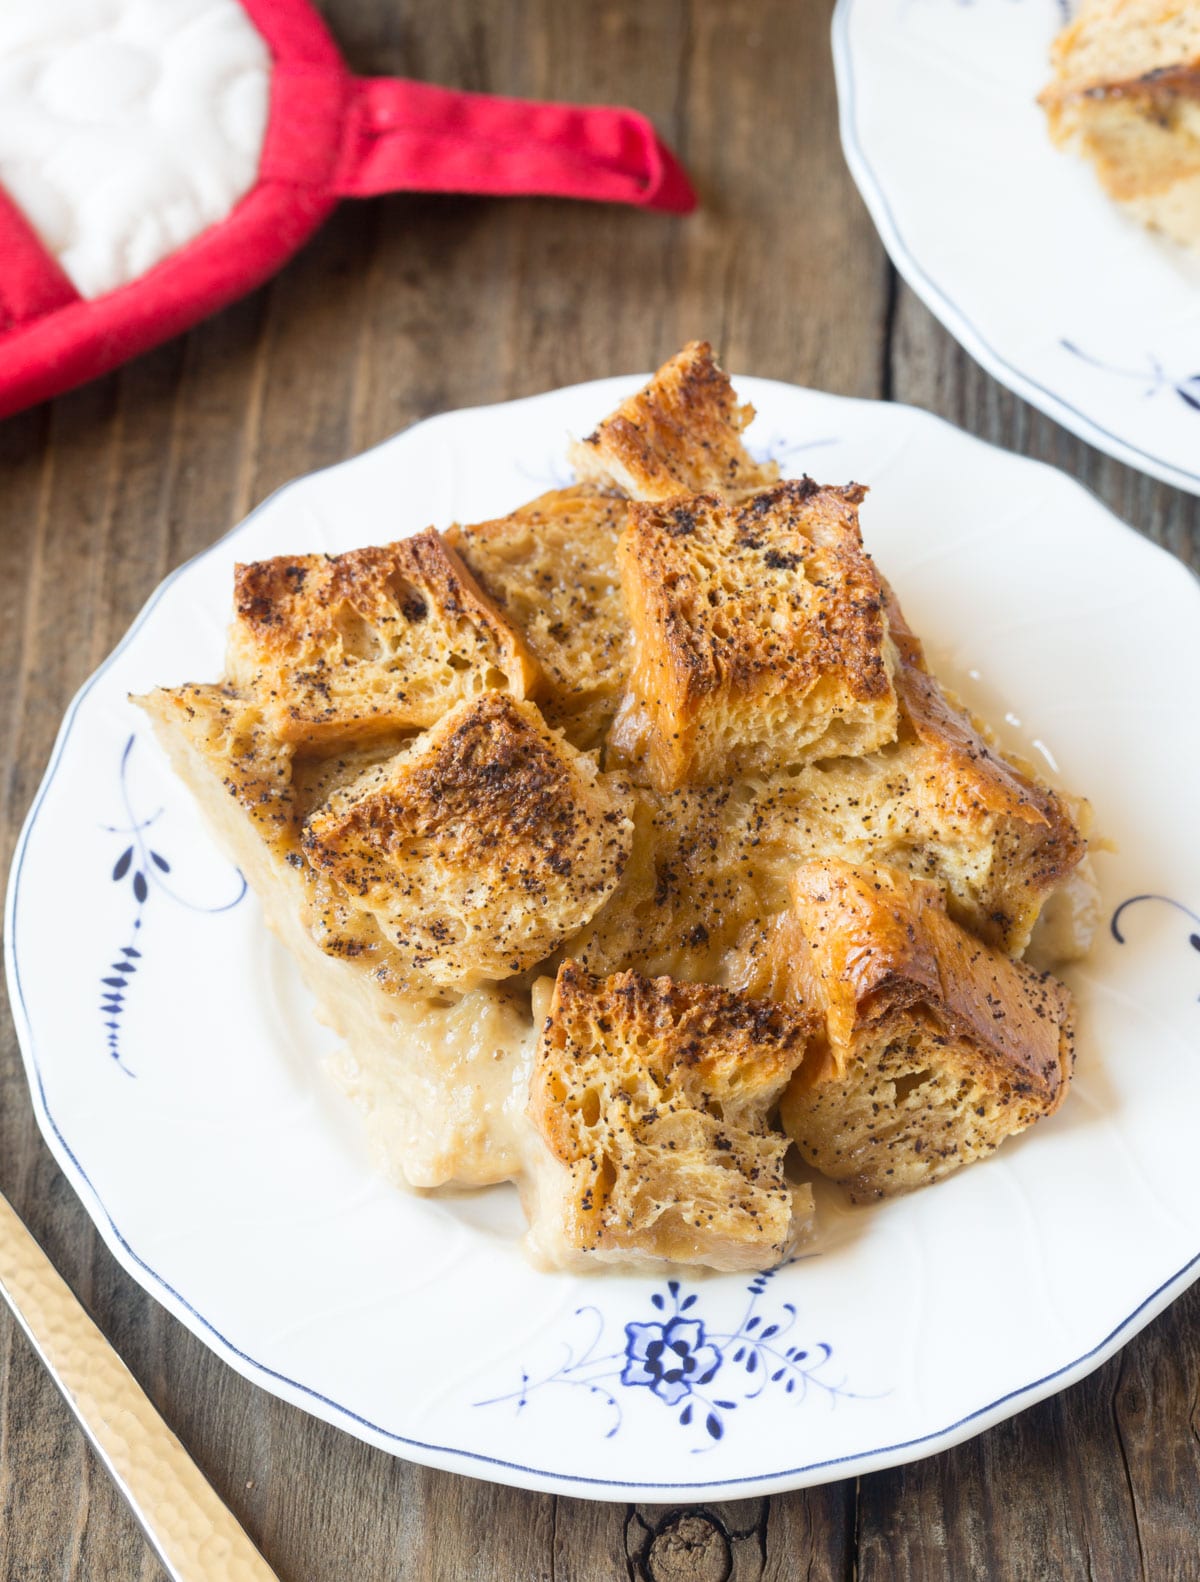 Easy Vietnamese Coffee Bread Pudding Recipe #ASpicyPerspective #holiday #christmas